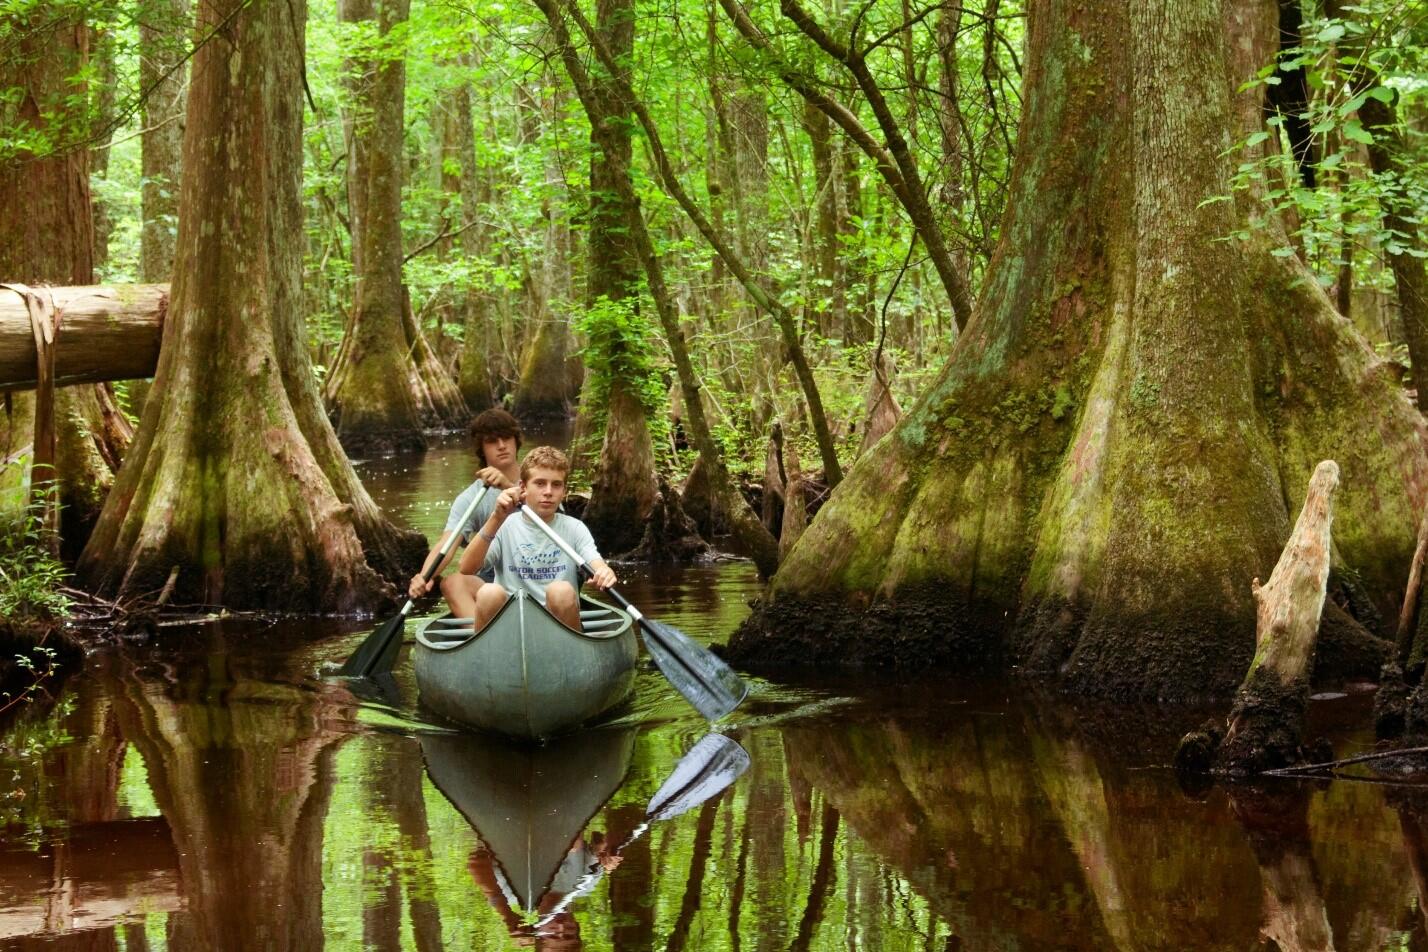 Two boys paddle upstream in a metal canoe. Large trees rise from the water on either side of them.